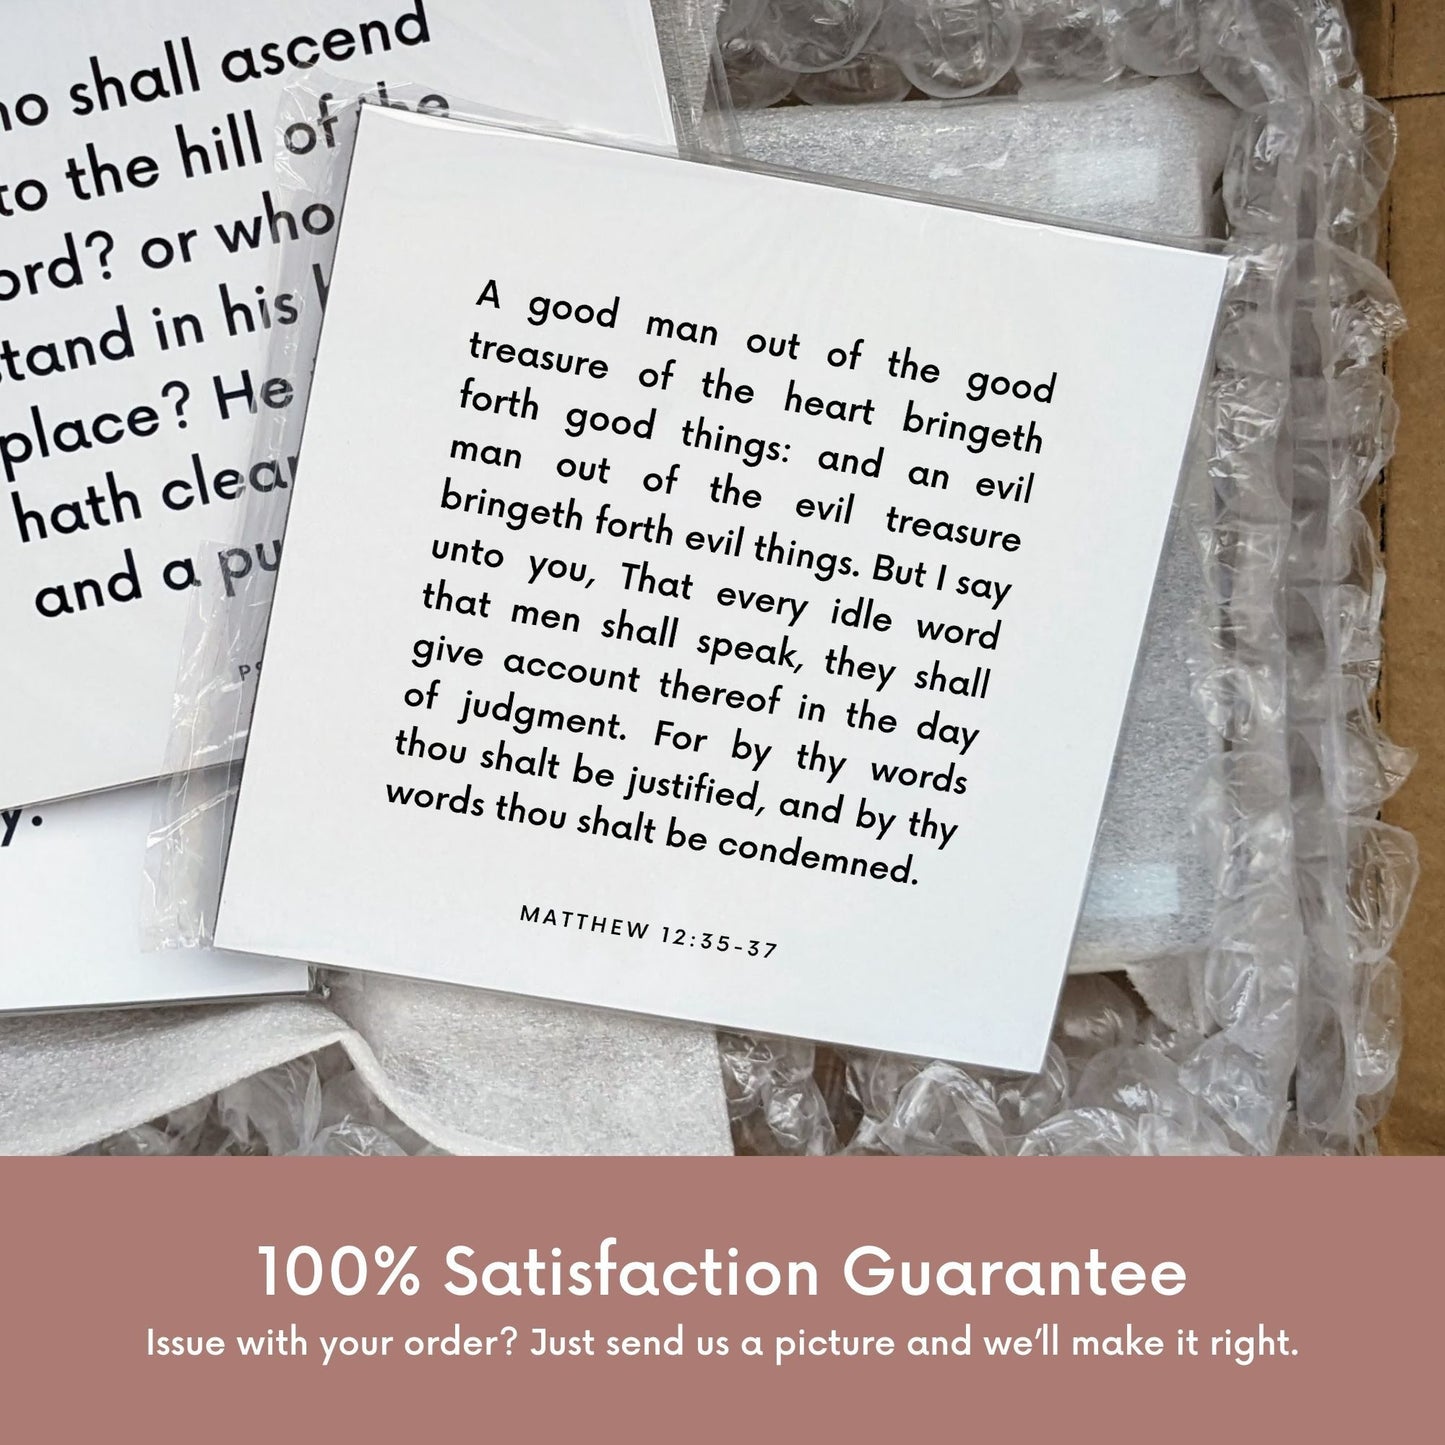 Shipping materials for scripture tile of Matthew 12:35-37 - "By thy words thou shalt be justified"